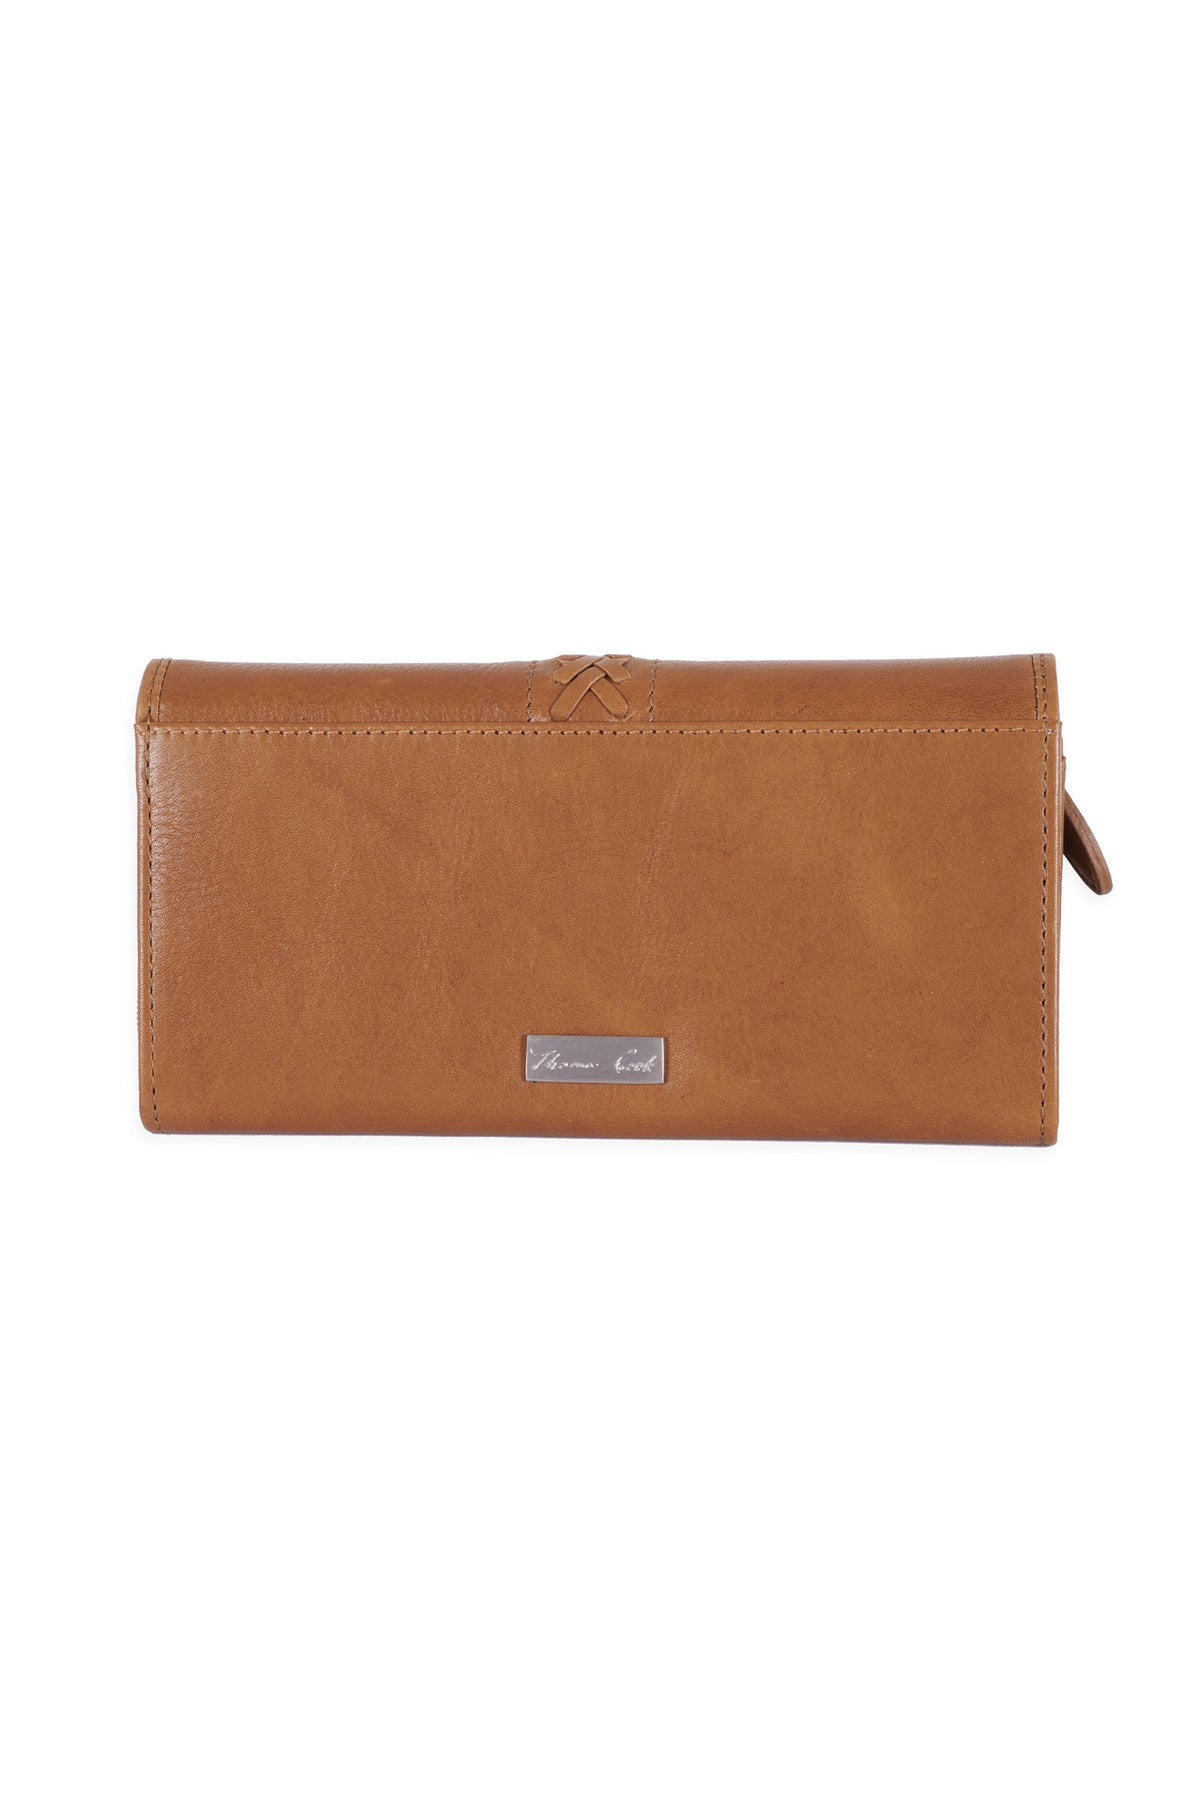 Thomas Cook Lucy wallet - Tan